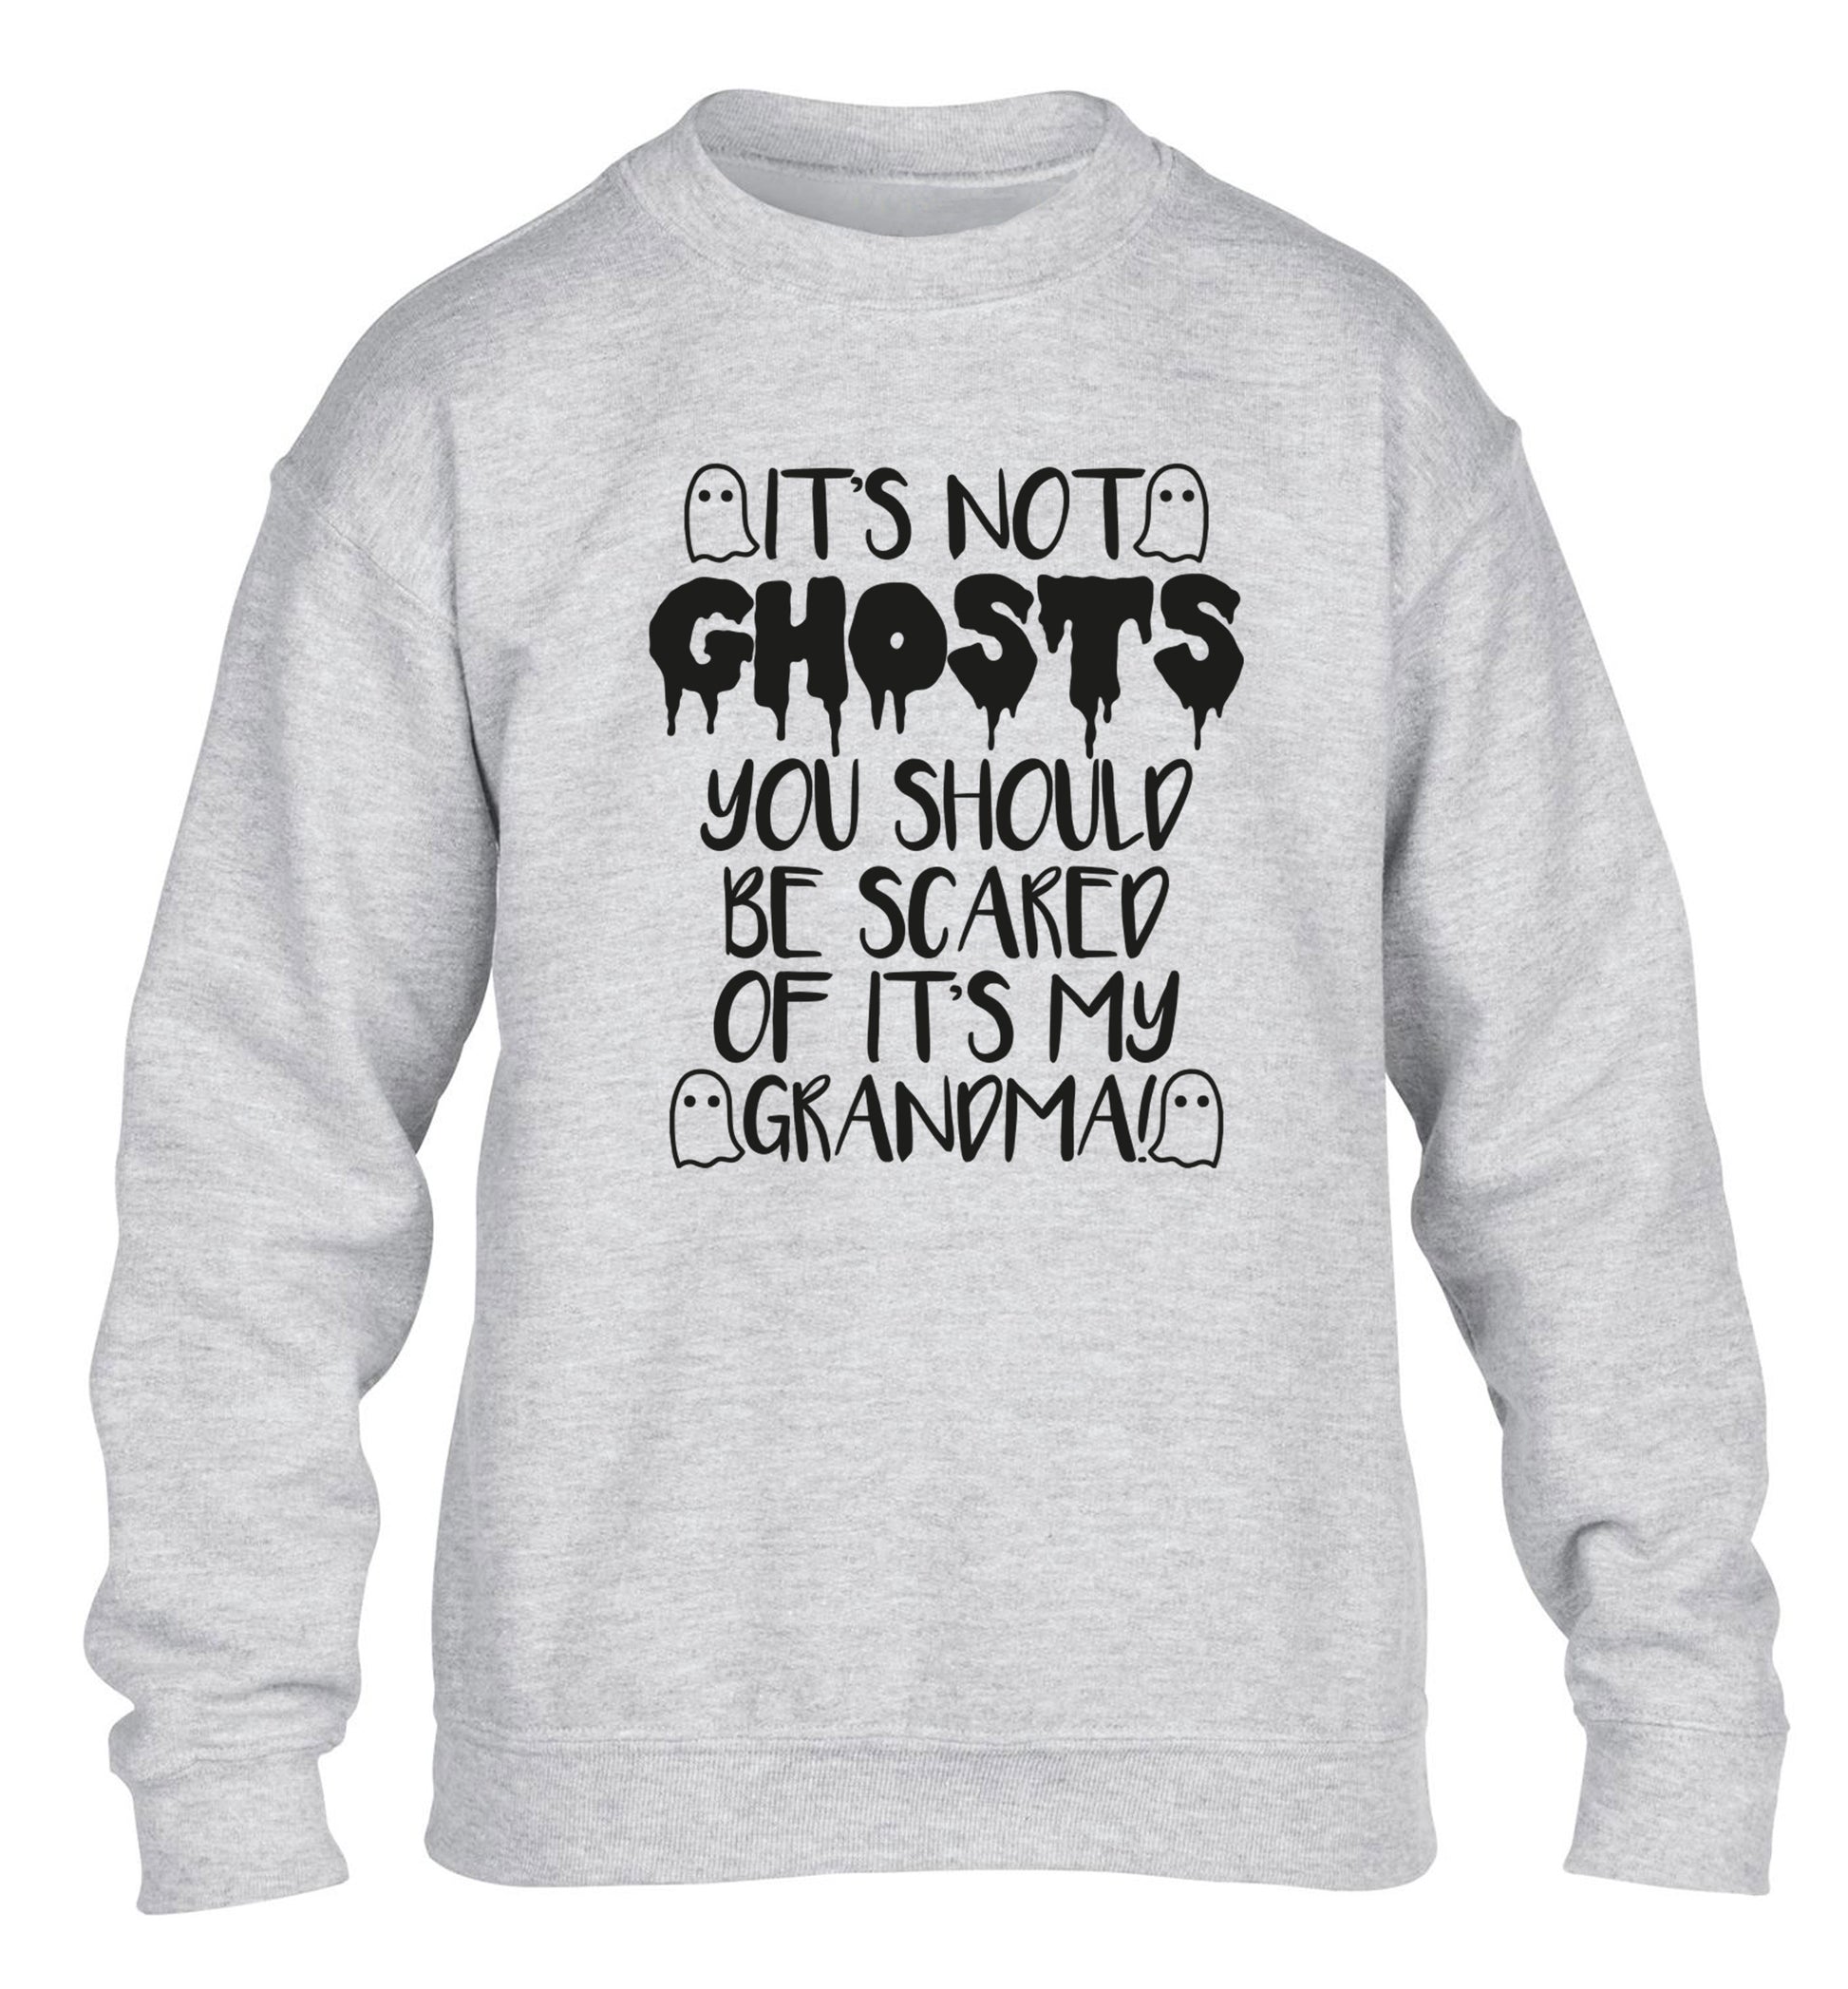 It's not ghosts you should be scared of it's my grandma! children's grey sweater 12-14 Years